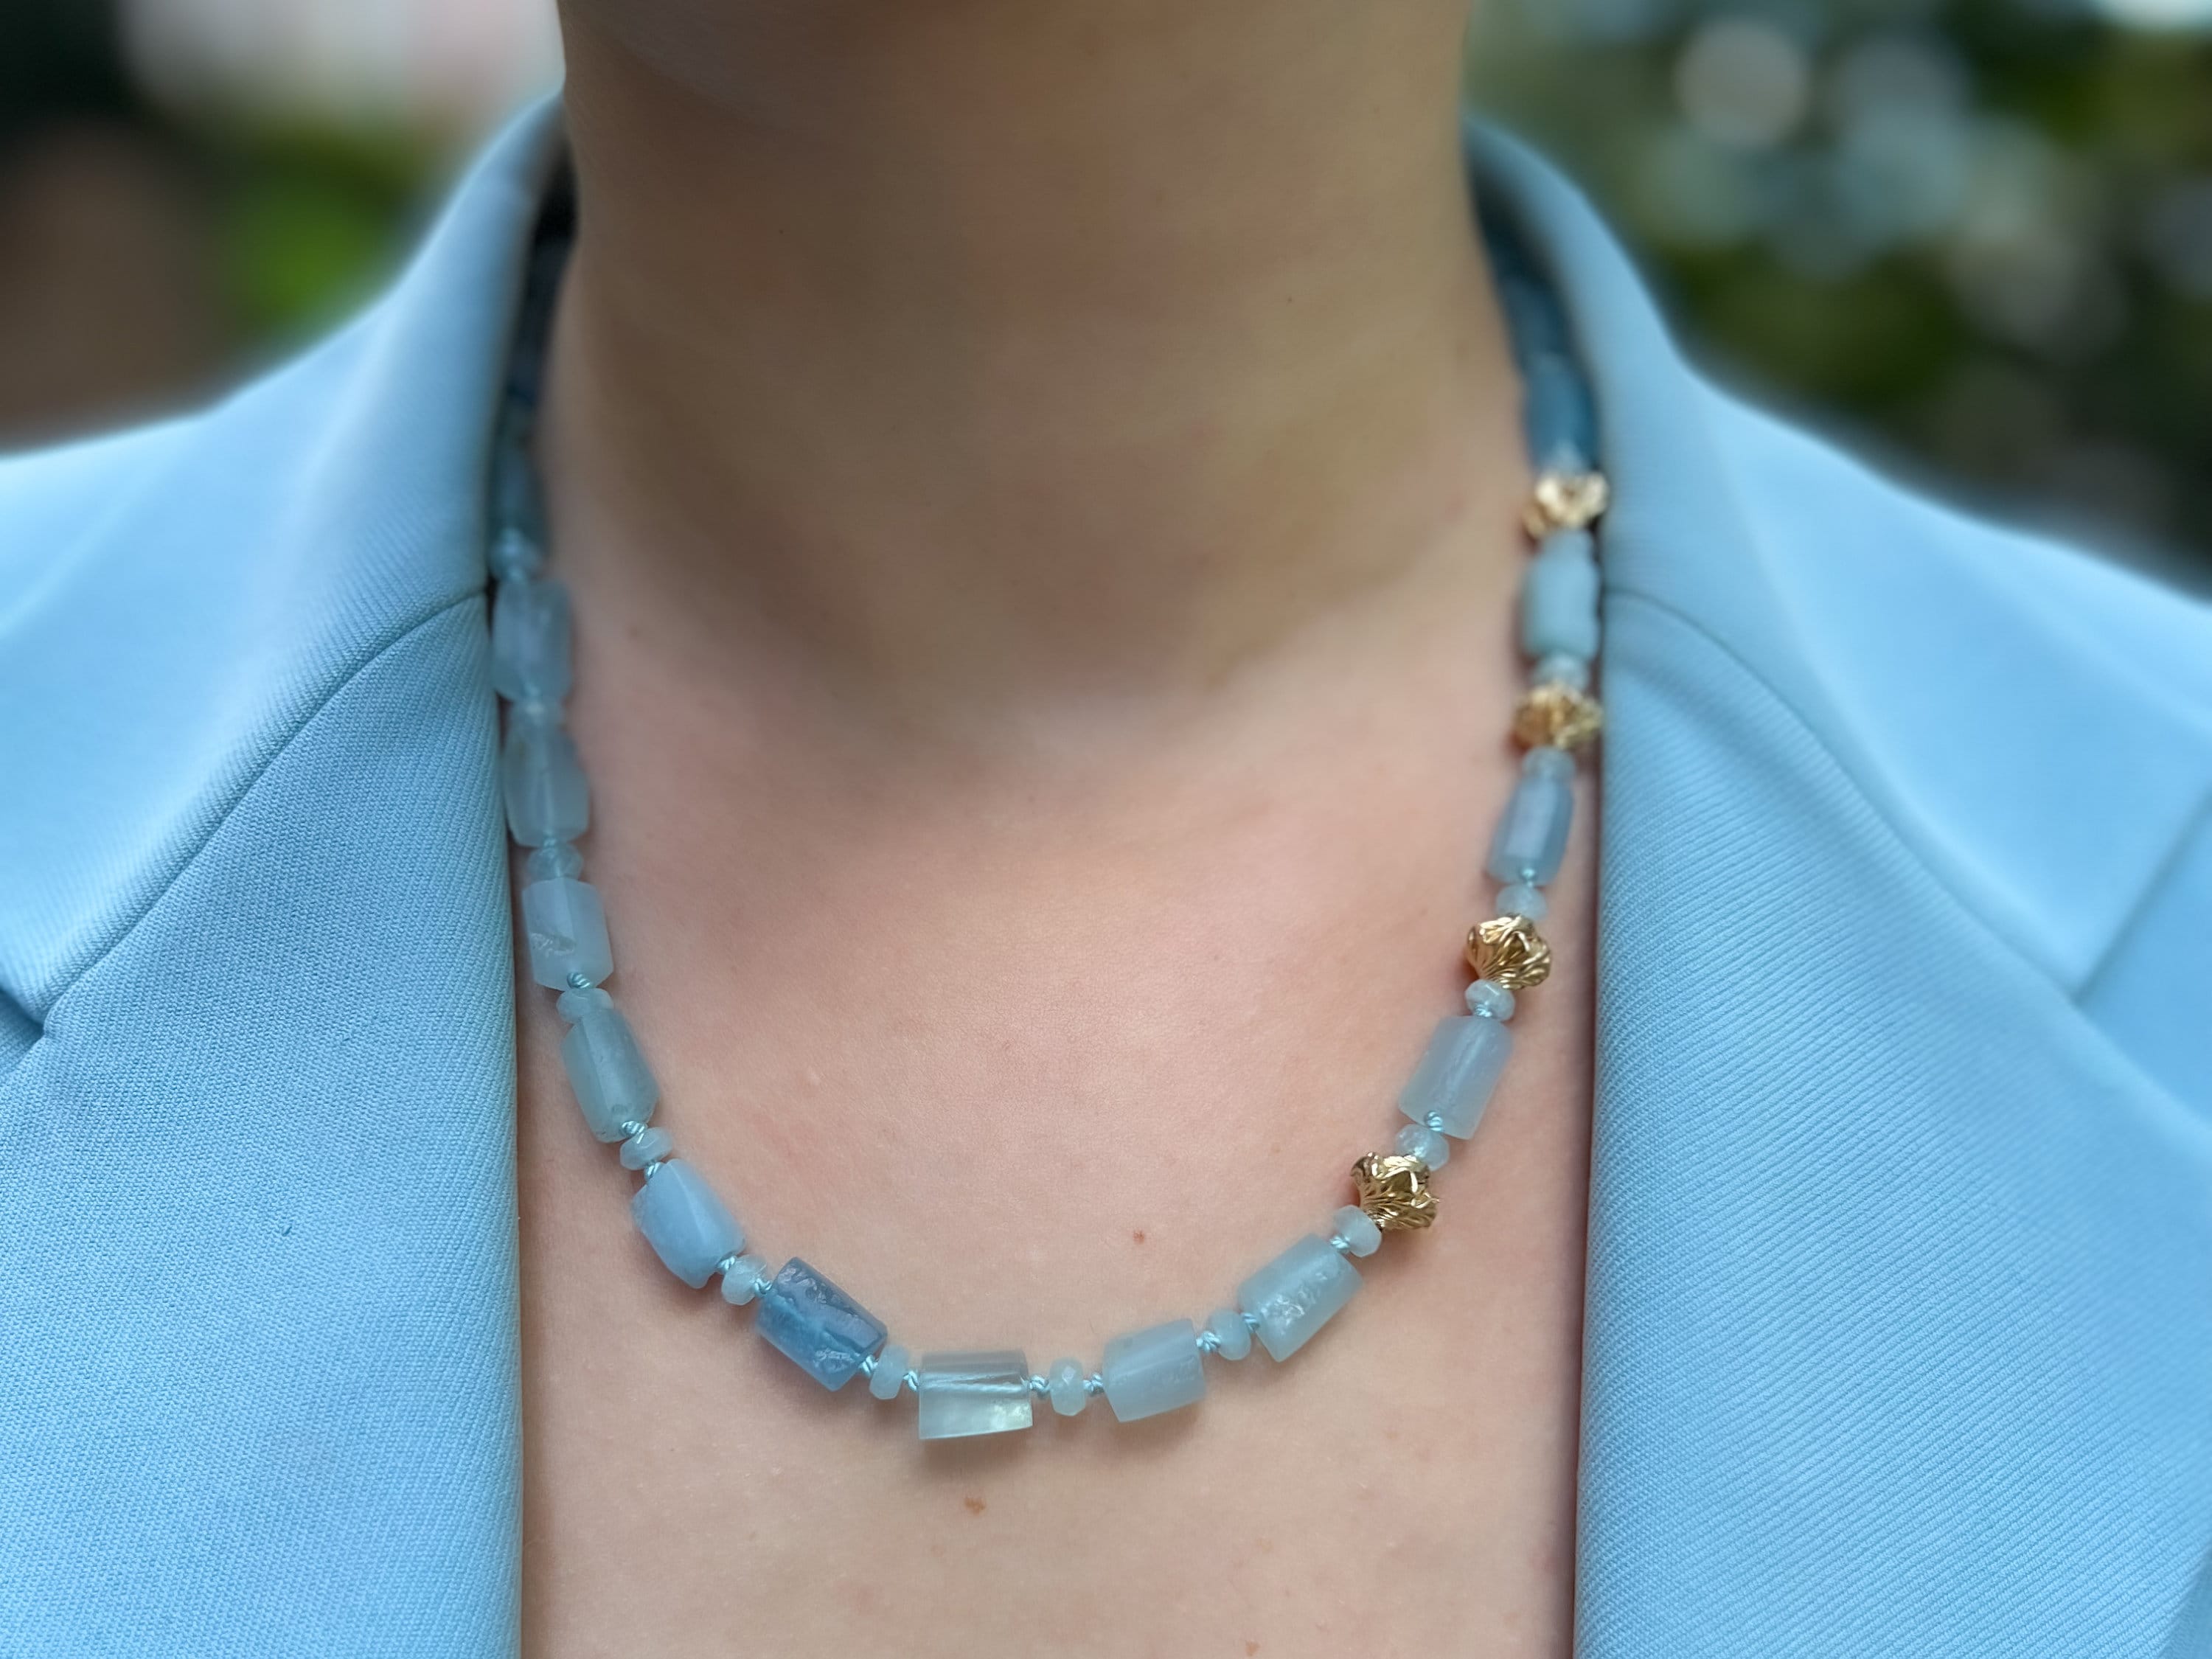 Aquamarines,Aquamarine_necklace,Gemstone_Necklace,Gold_Filled_accents,Gold_filled,Ocean_Blue_stone,Gifts_for_Her,Mother's_Day,handmade_necklace,Short_necklace,classic_Necklace,Fall_Necklace,hand_knotted_stones